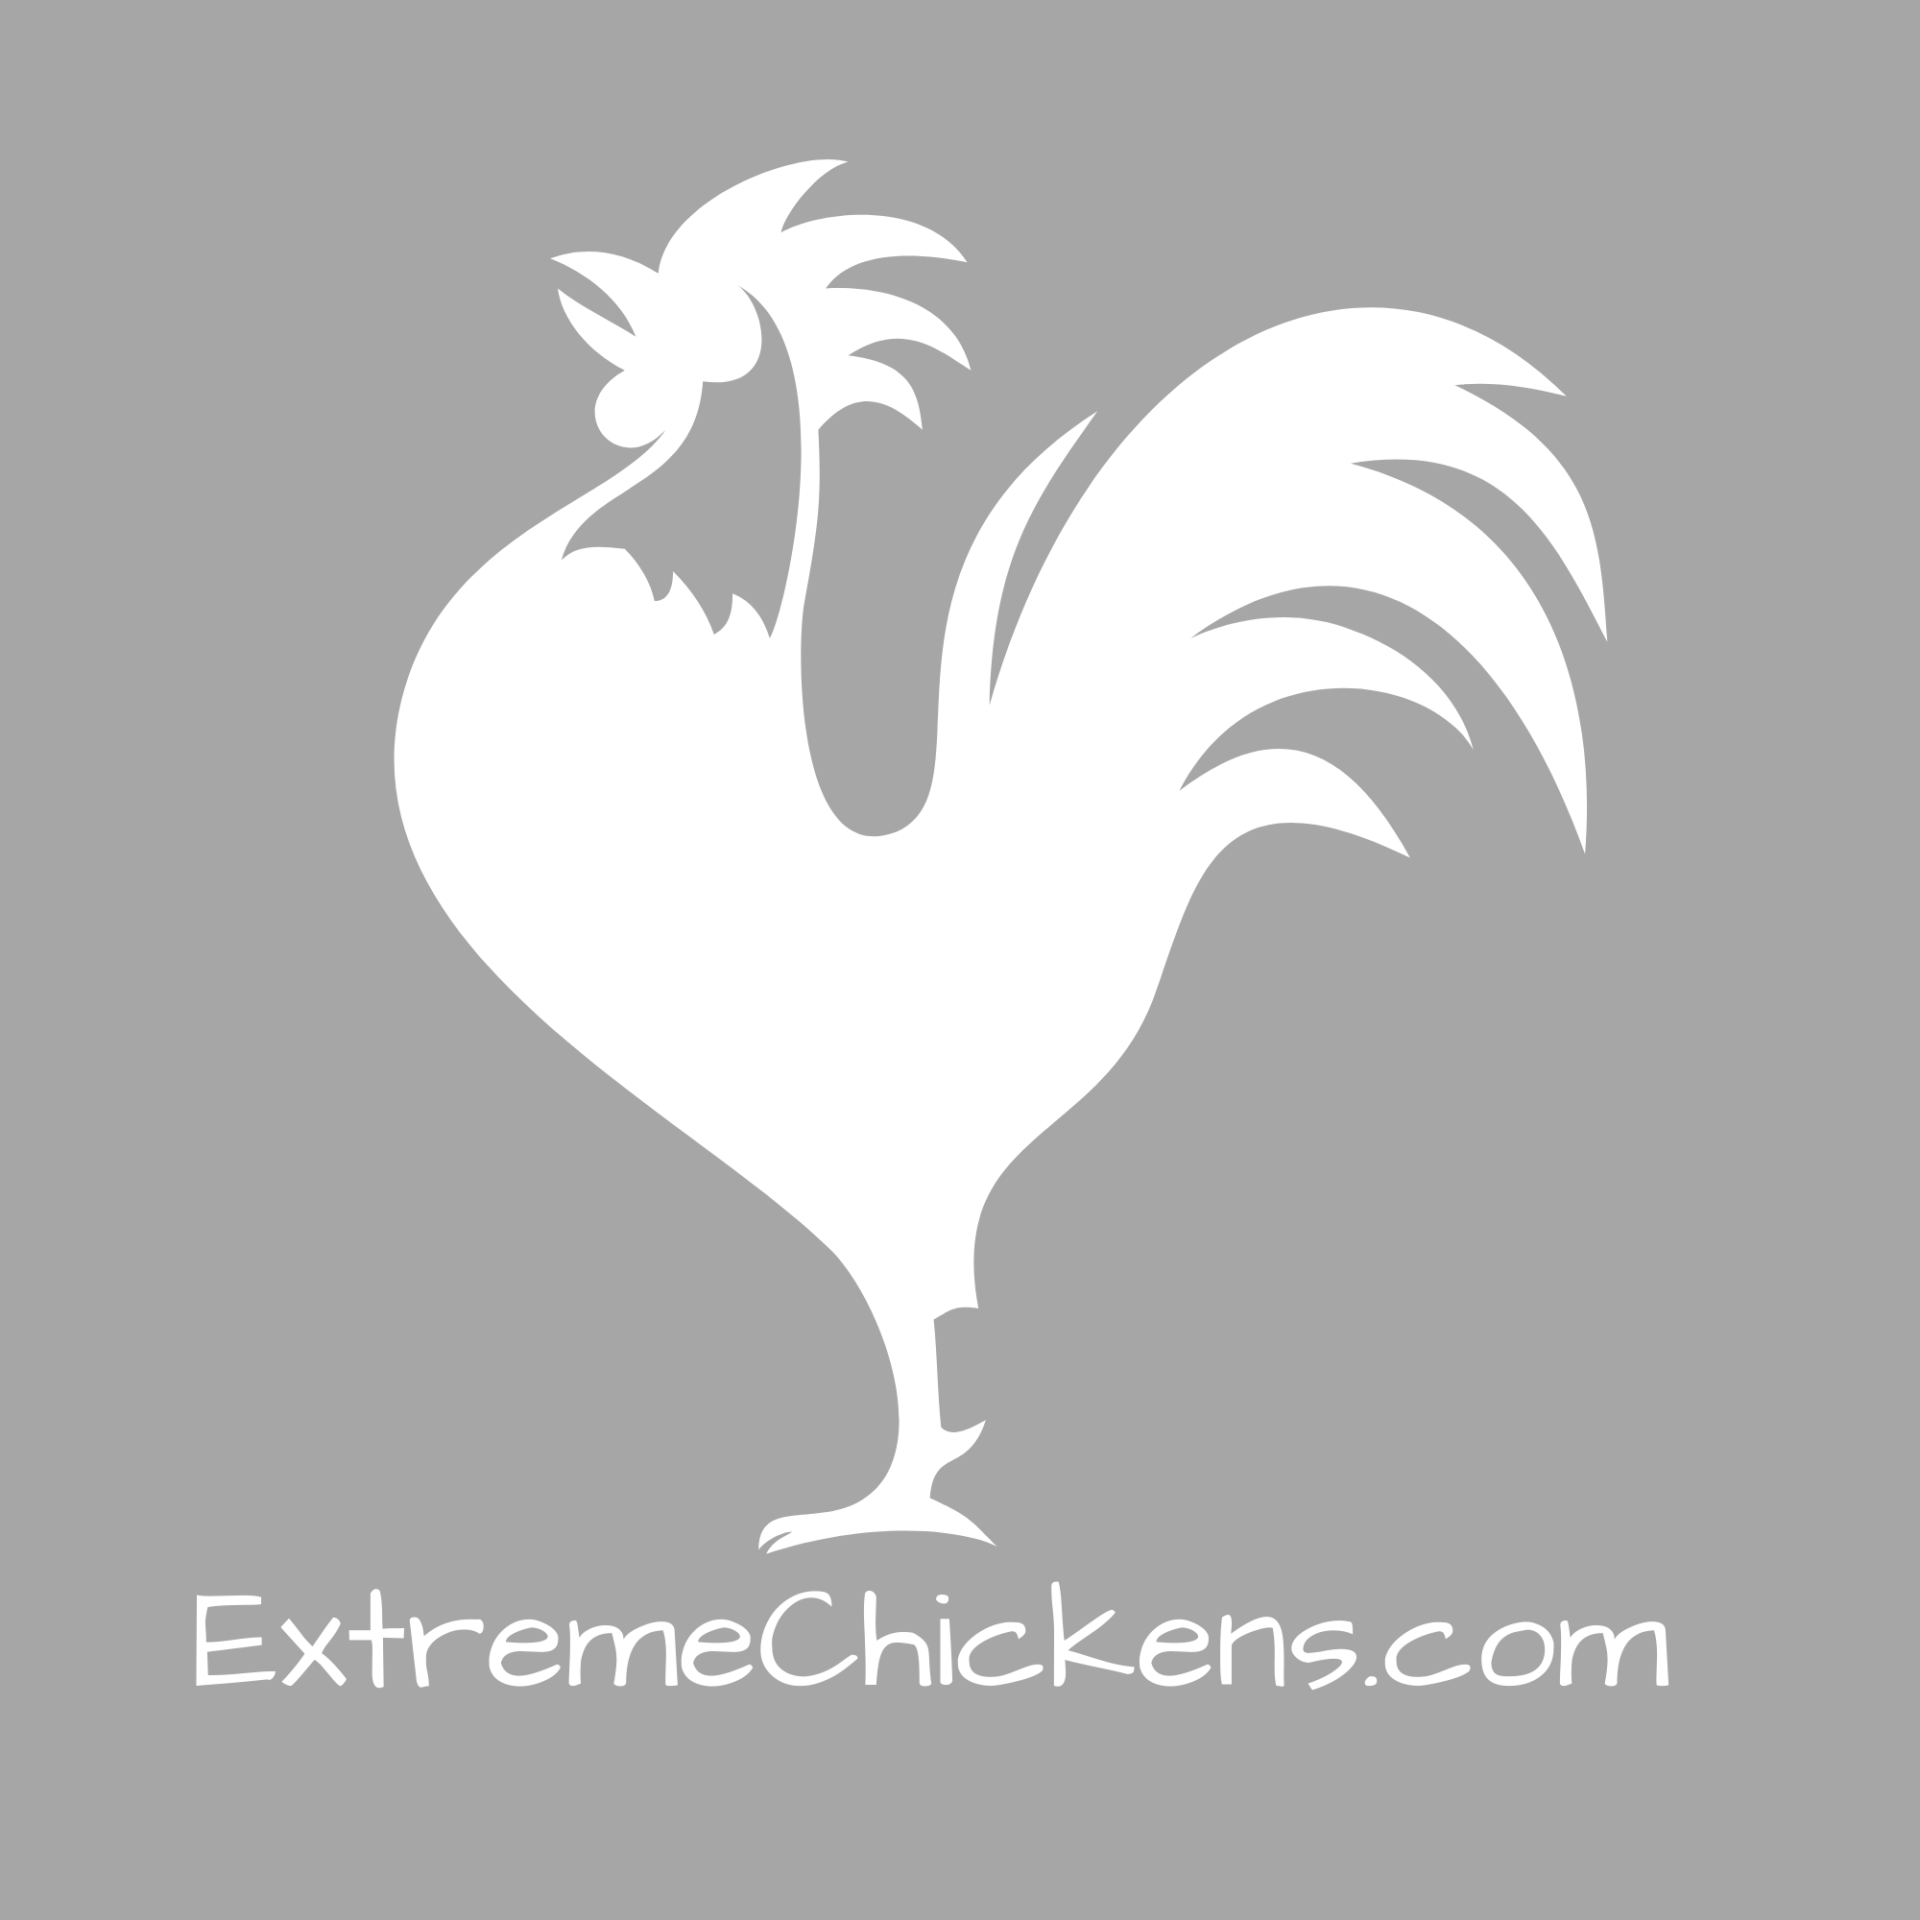 ExtremeChickens 2 white logo with transparent background 2000 x 2000(1)